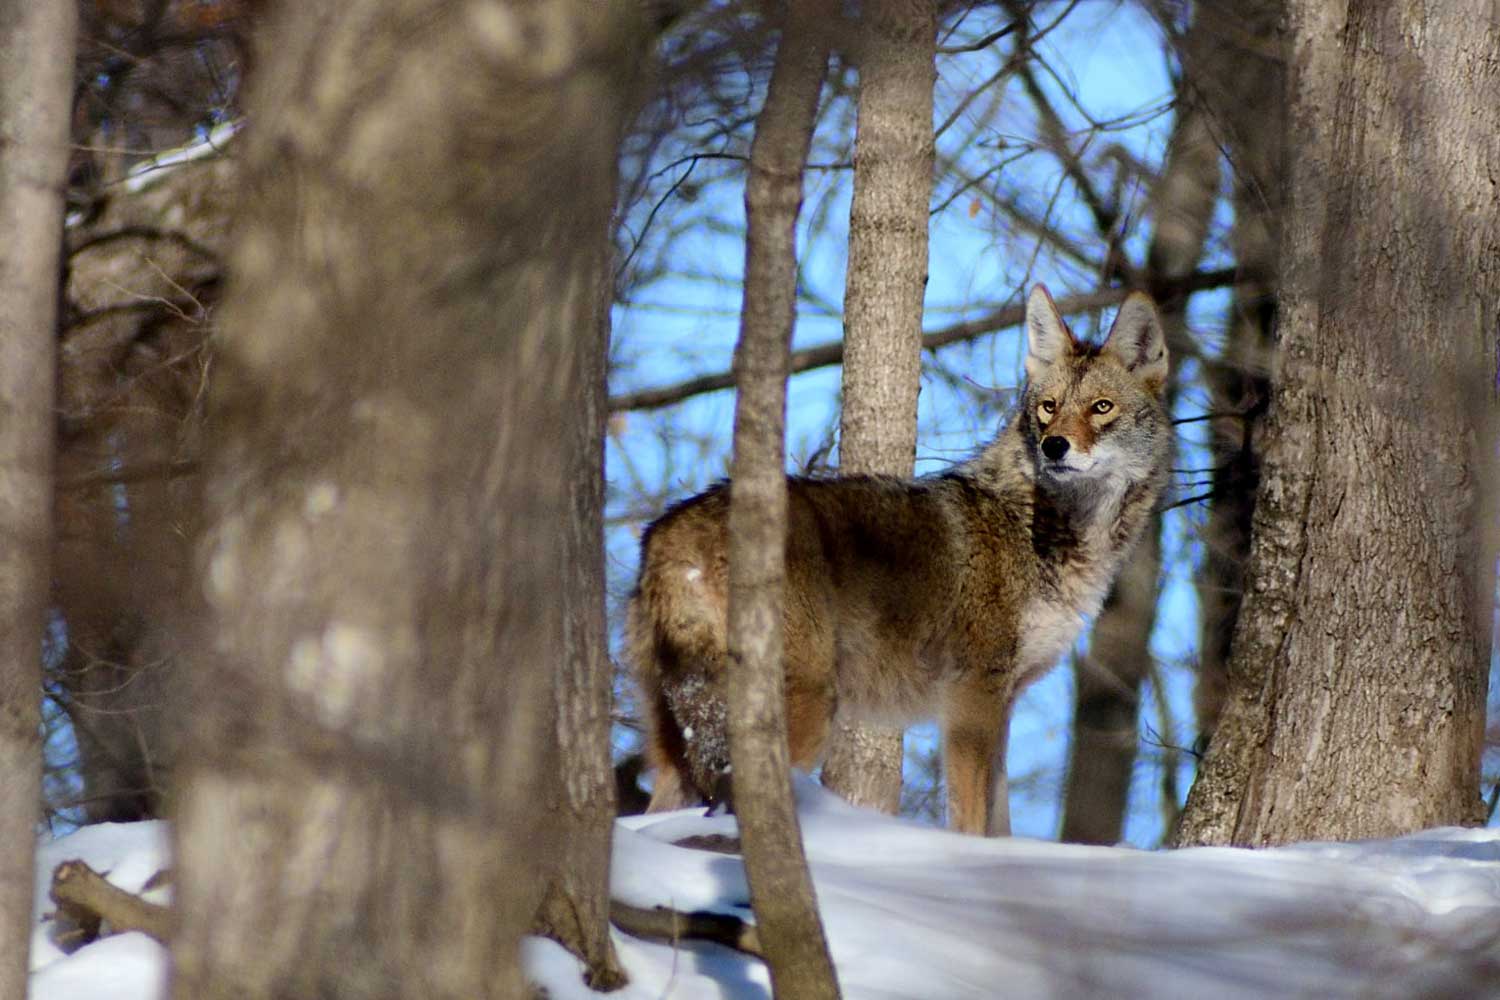 A coyote standing in a snow-covered forest.